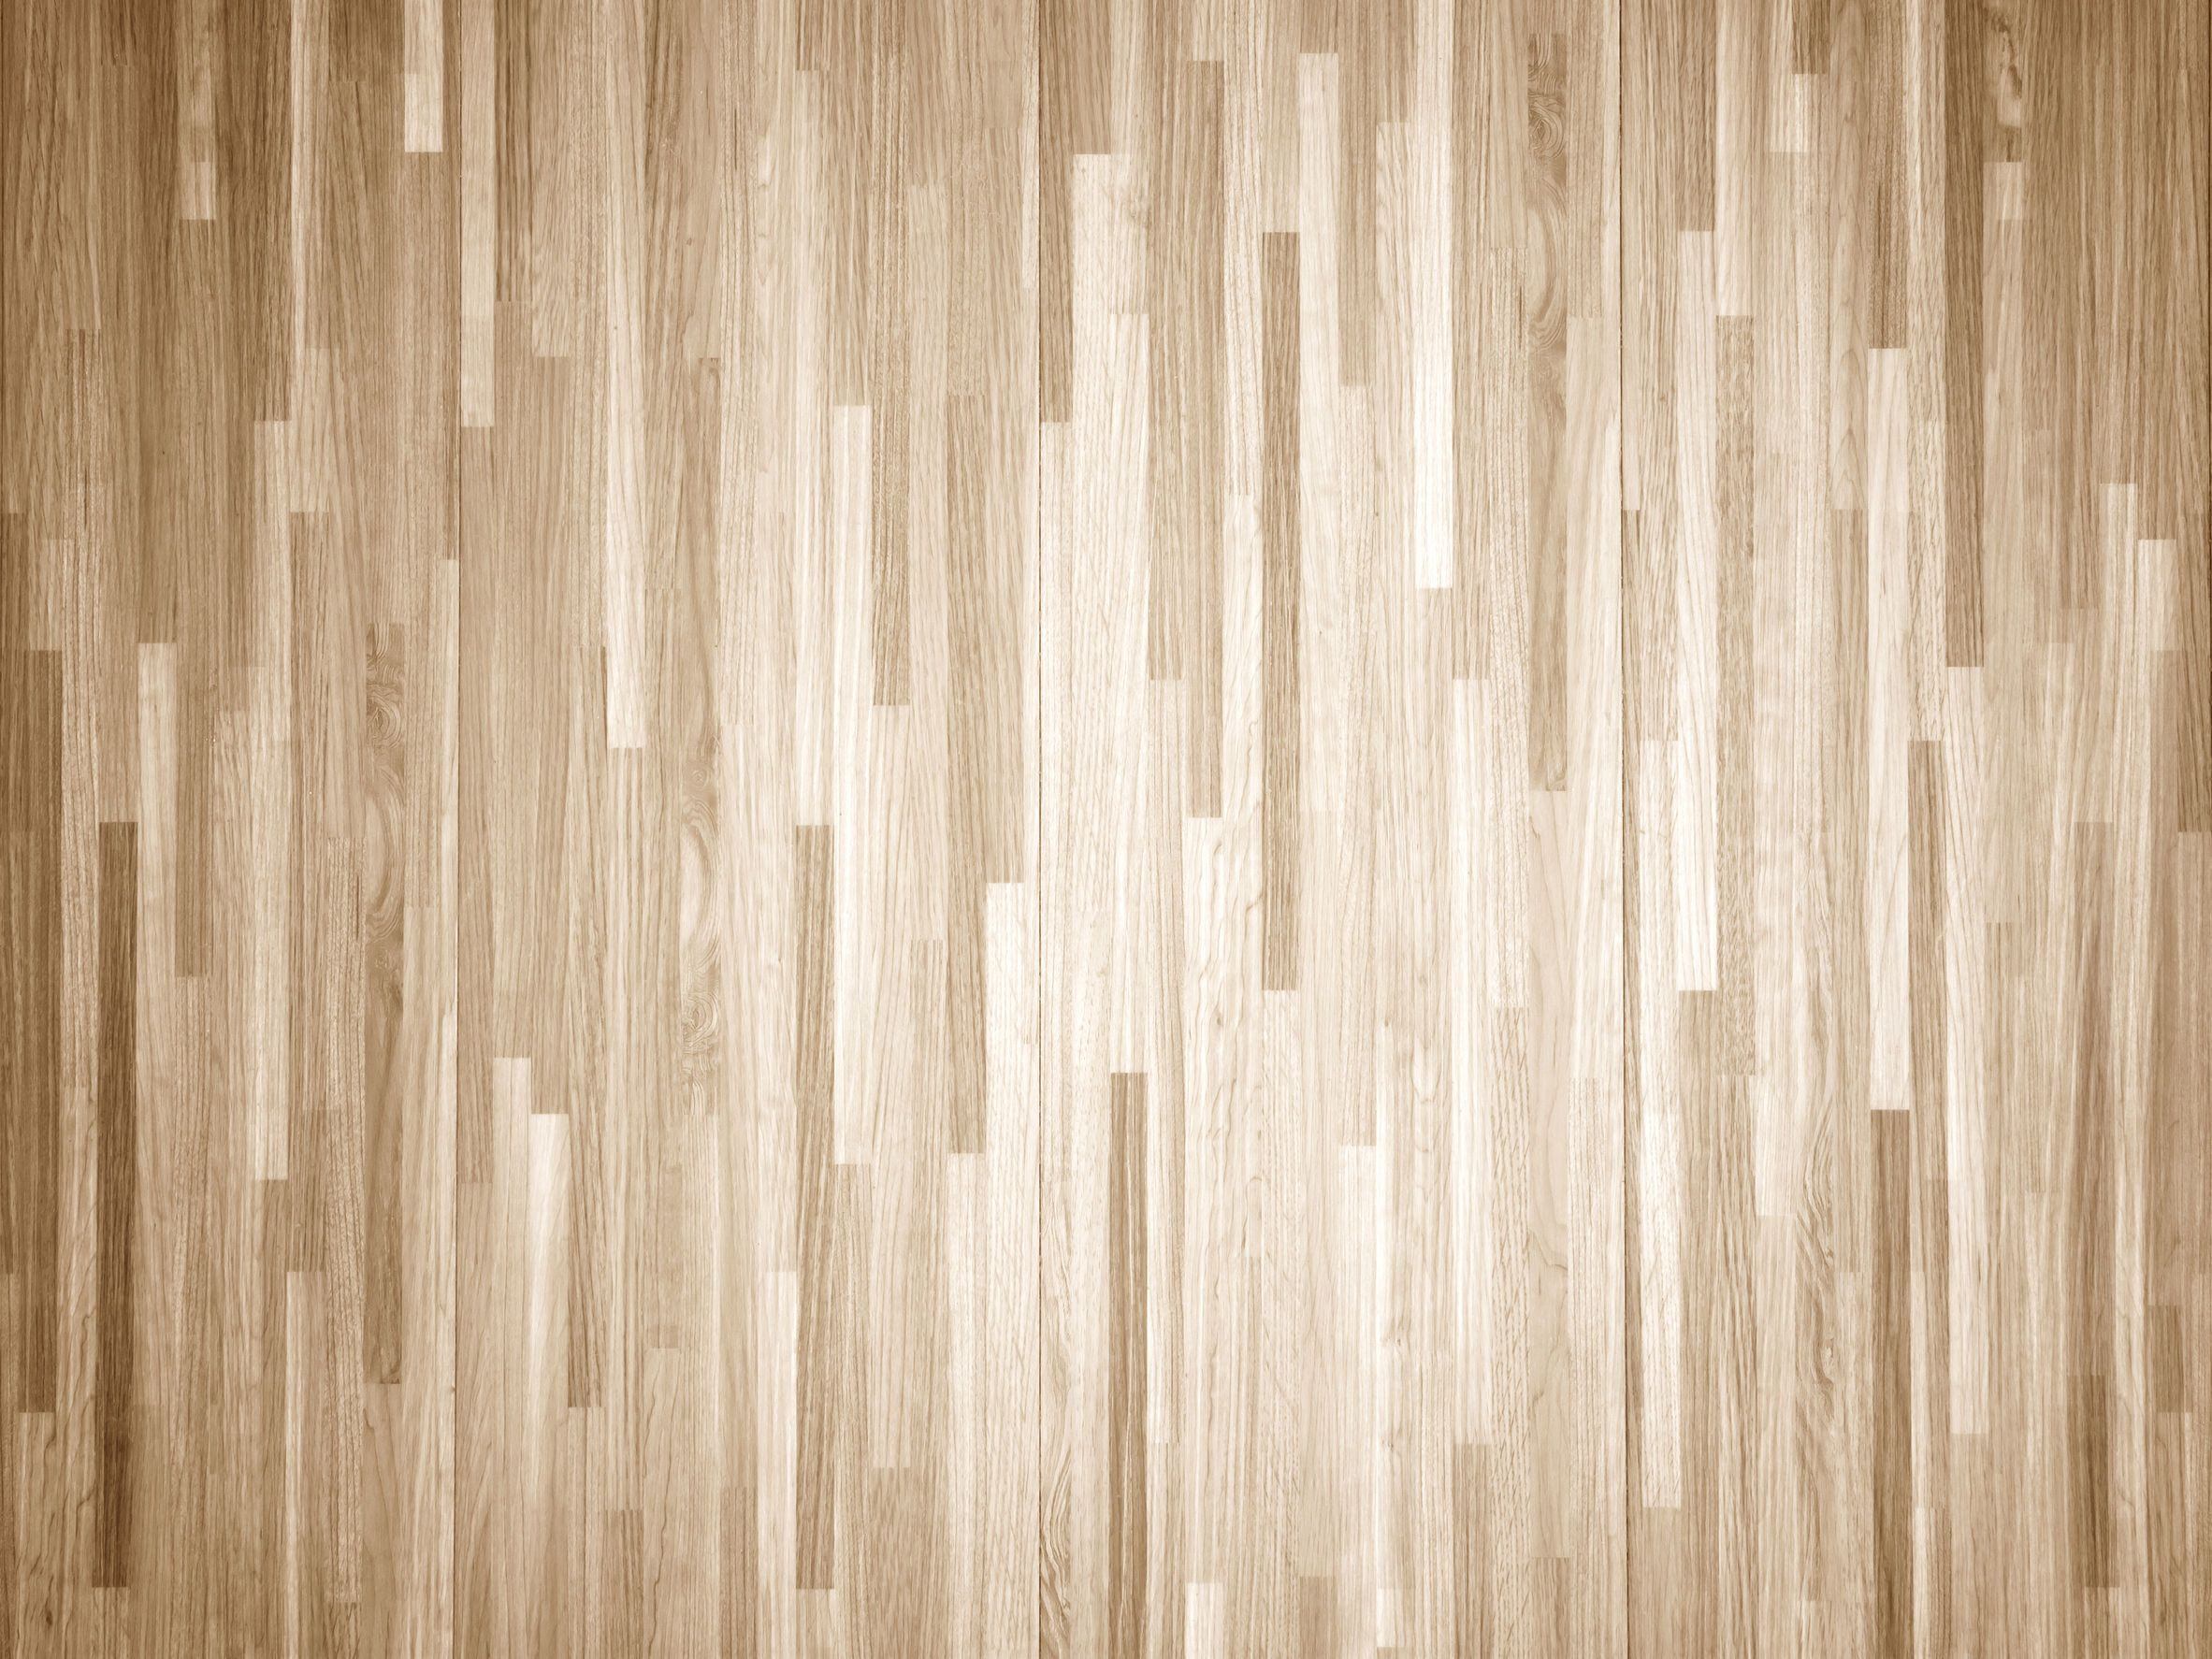 26 Unique Hardwood Floor Nails Coming Up 2024 free download hardwood floor nails coming up of how to chemically strip wood floors woodfloordoctor com intended for you